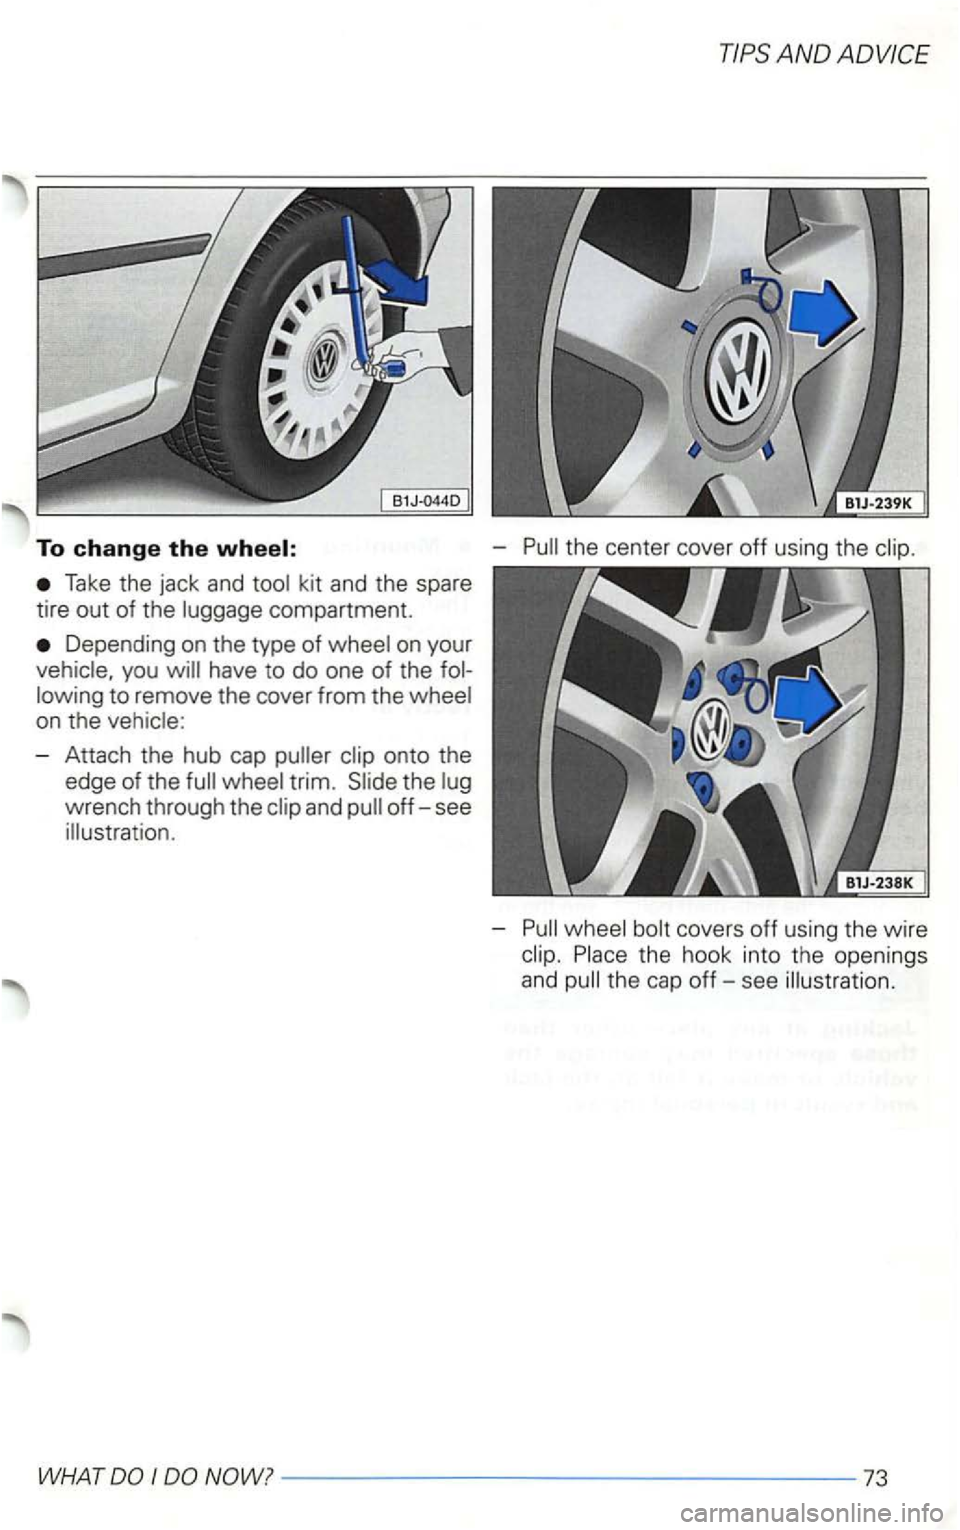 VOLKSWAGEN GOLF 2003  Owners Manual To change the 
Take the jack  and kit and  the spare 
tire 
out of  the compartment. 
Depending  on the  type  of on your 
have  to do  one  of the 
- Attach  the hub  cap 
wrench  through  the 
-
-
-